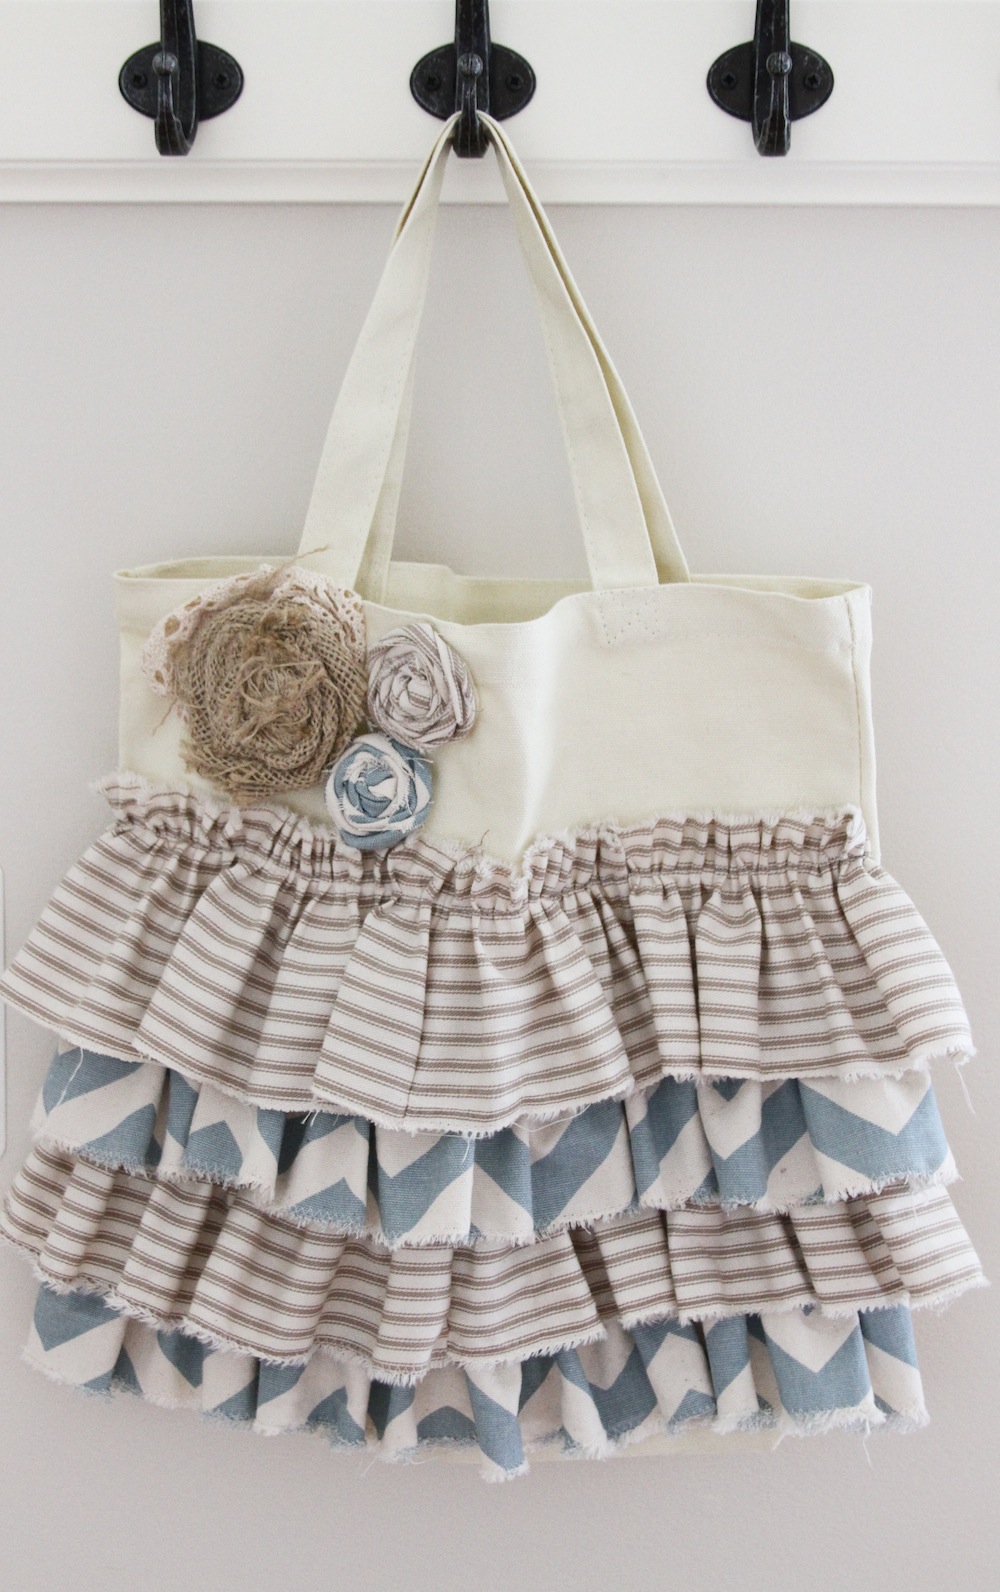 ... tote! These would make such cute gifts, they are so easy to make and